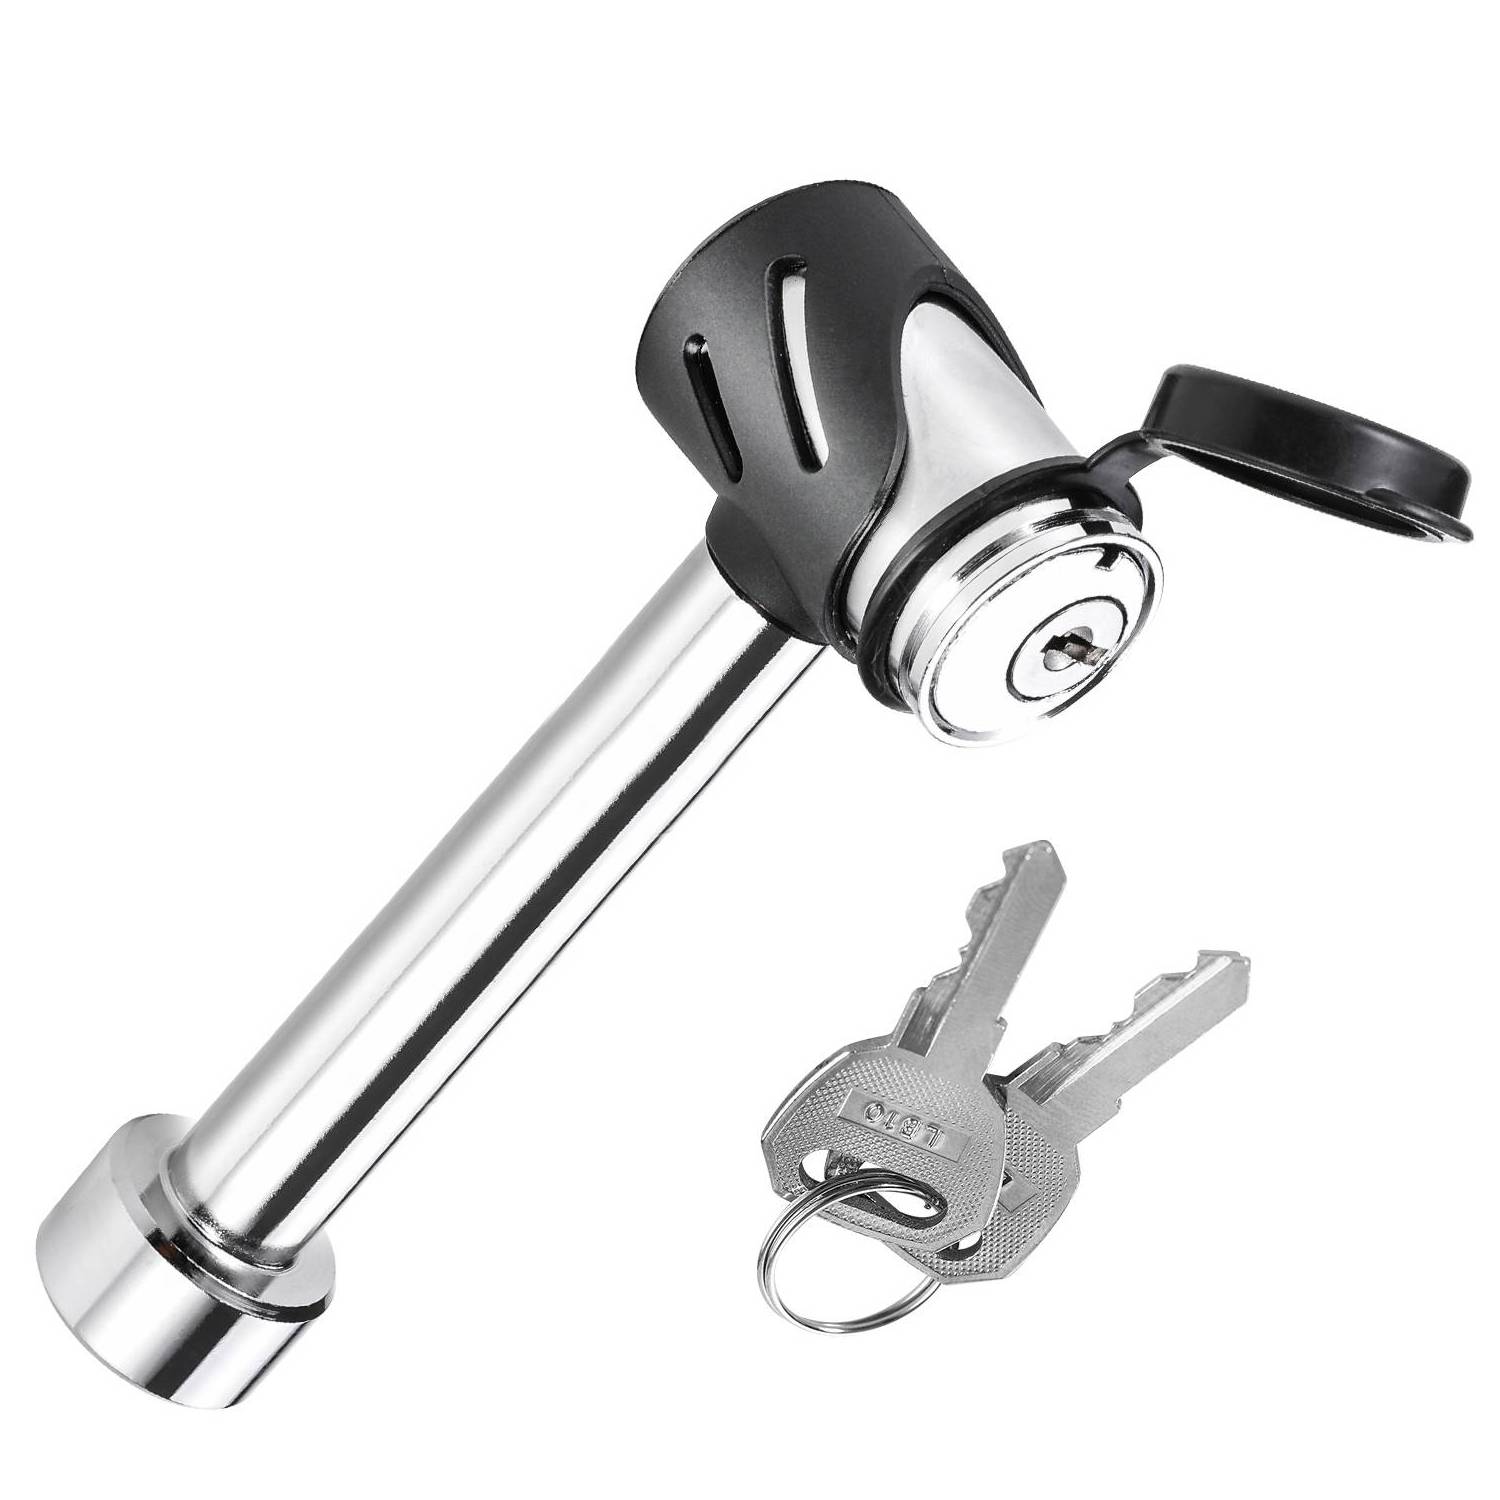 11101 5/8 Inch Swivel Head Chrome Trailer Hitch Receiver Pin Lock Featured Image